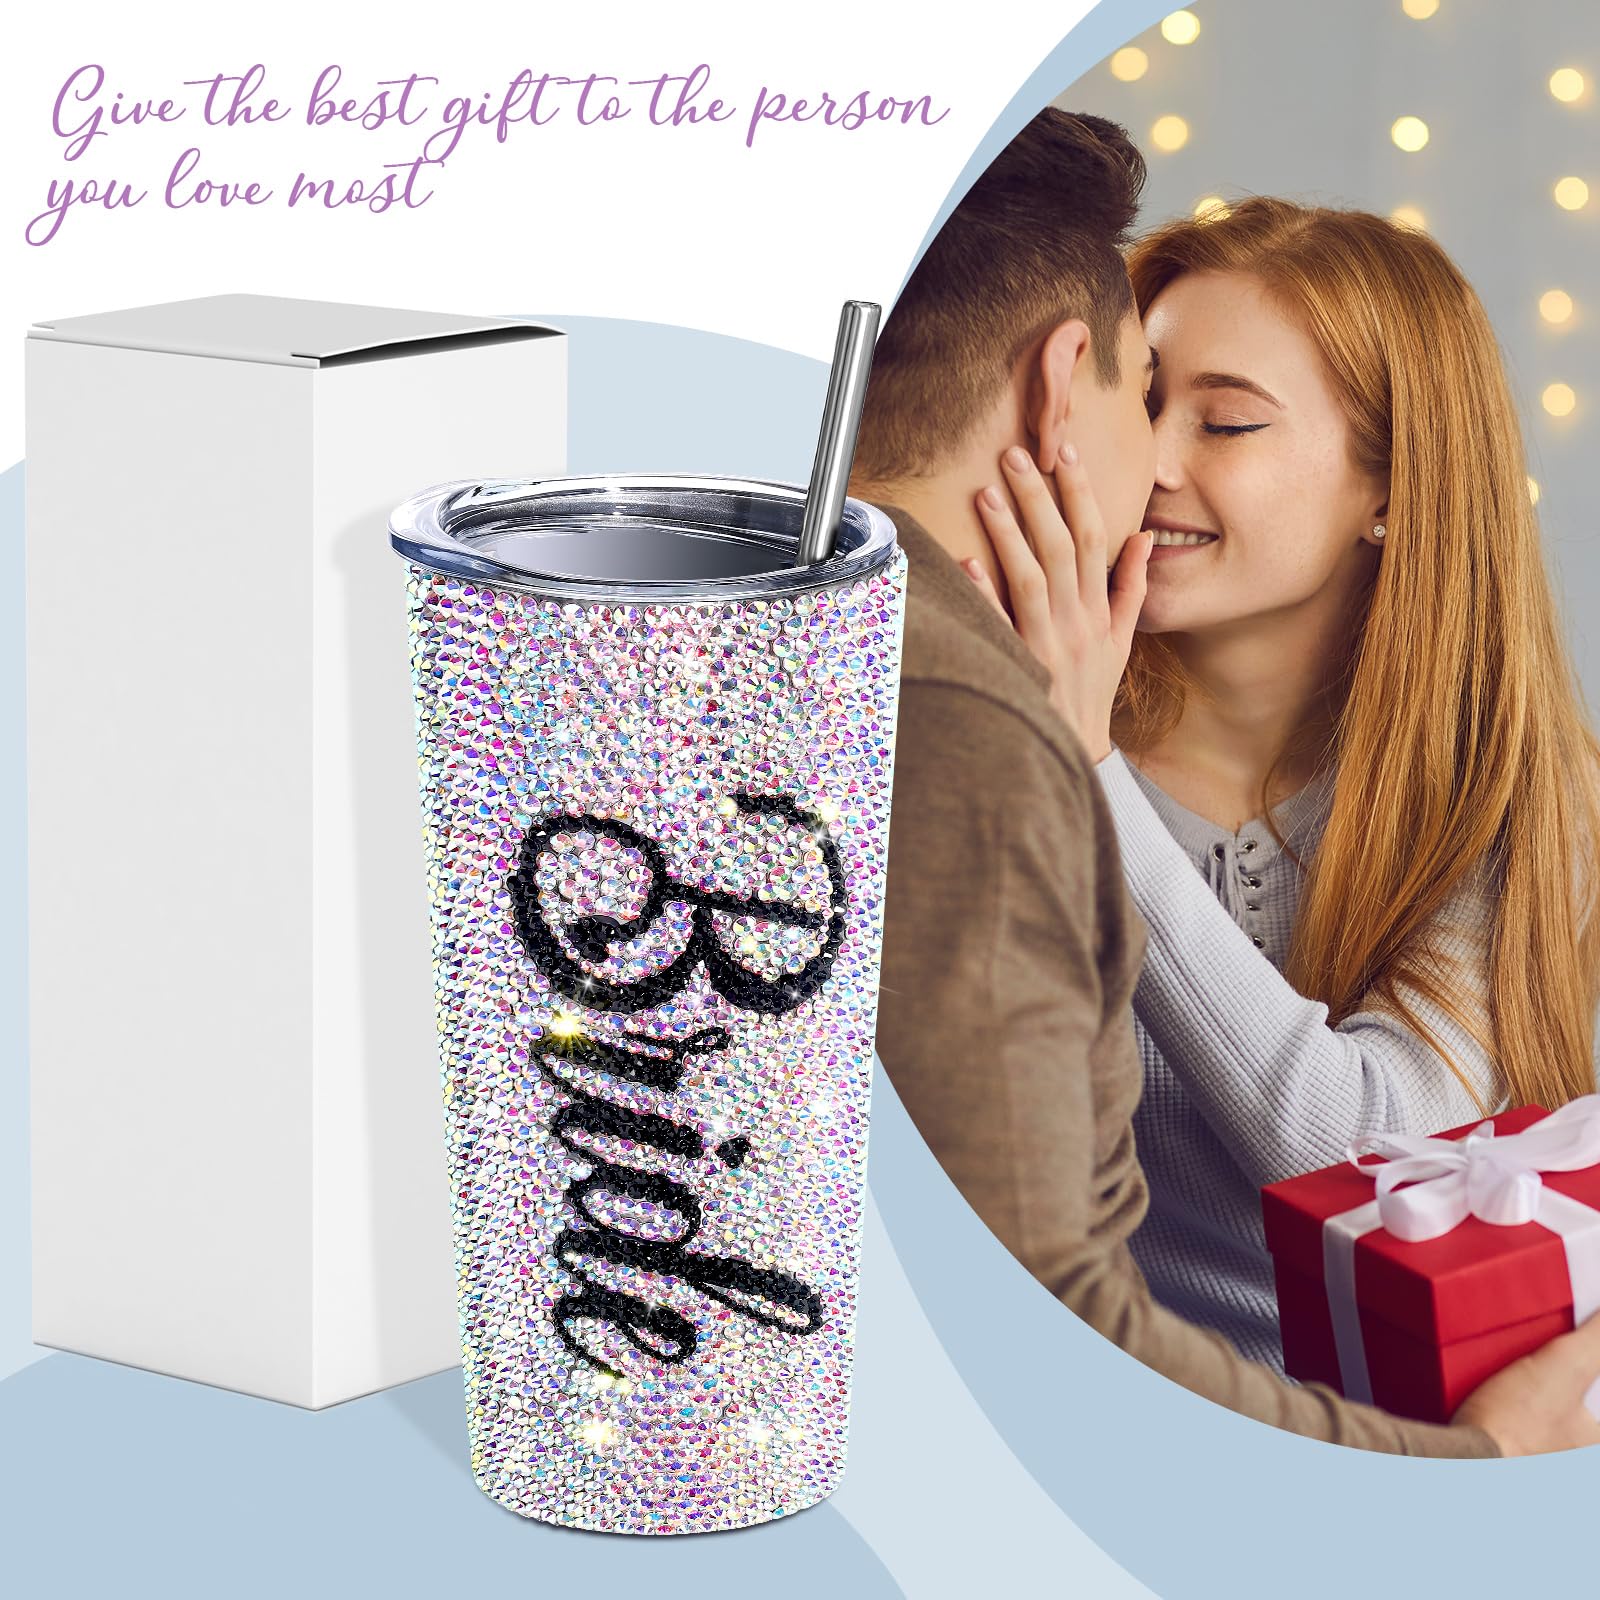 Vesici Bling Diamond Bride Tumbler 20 oz Bridal Insulated Tumbler with straw and lid Bridal Shower Gifts, Wedding Gifts For Bride Engagement Party Bachelorette Party Maid of Honor Tumbler (Stylish)